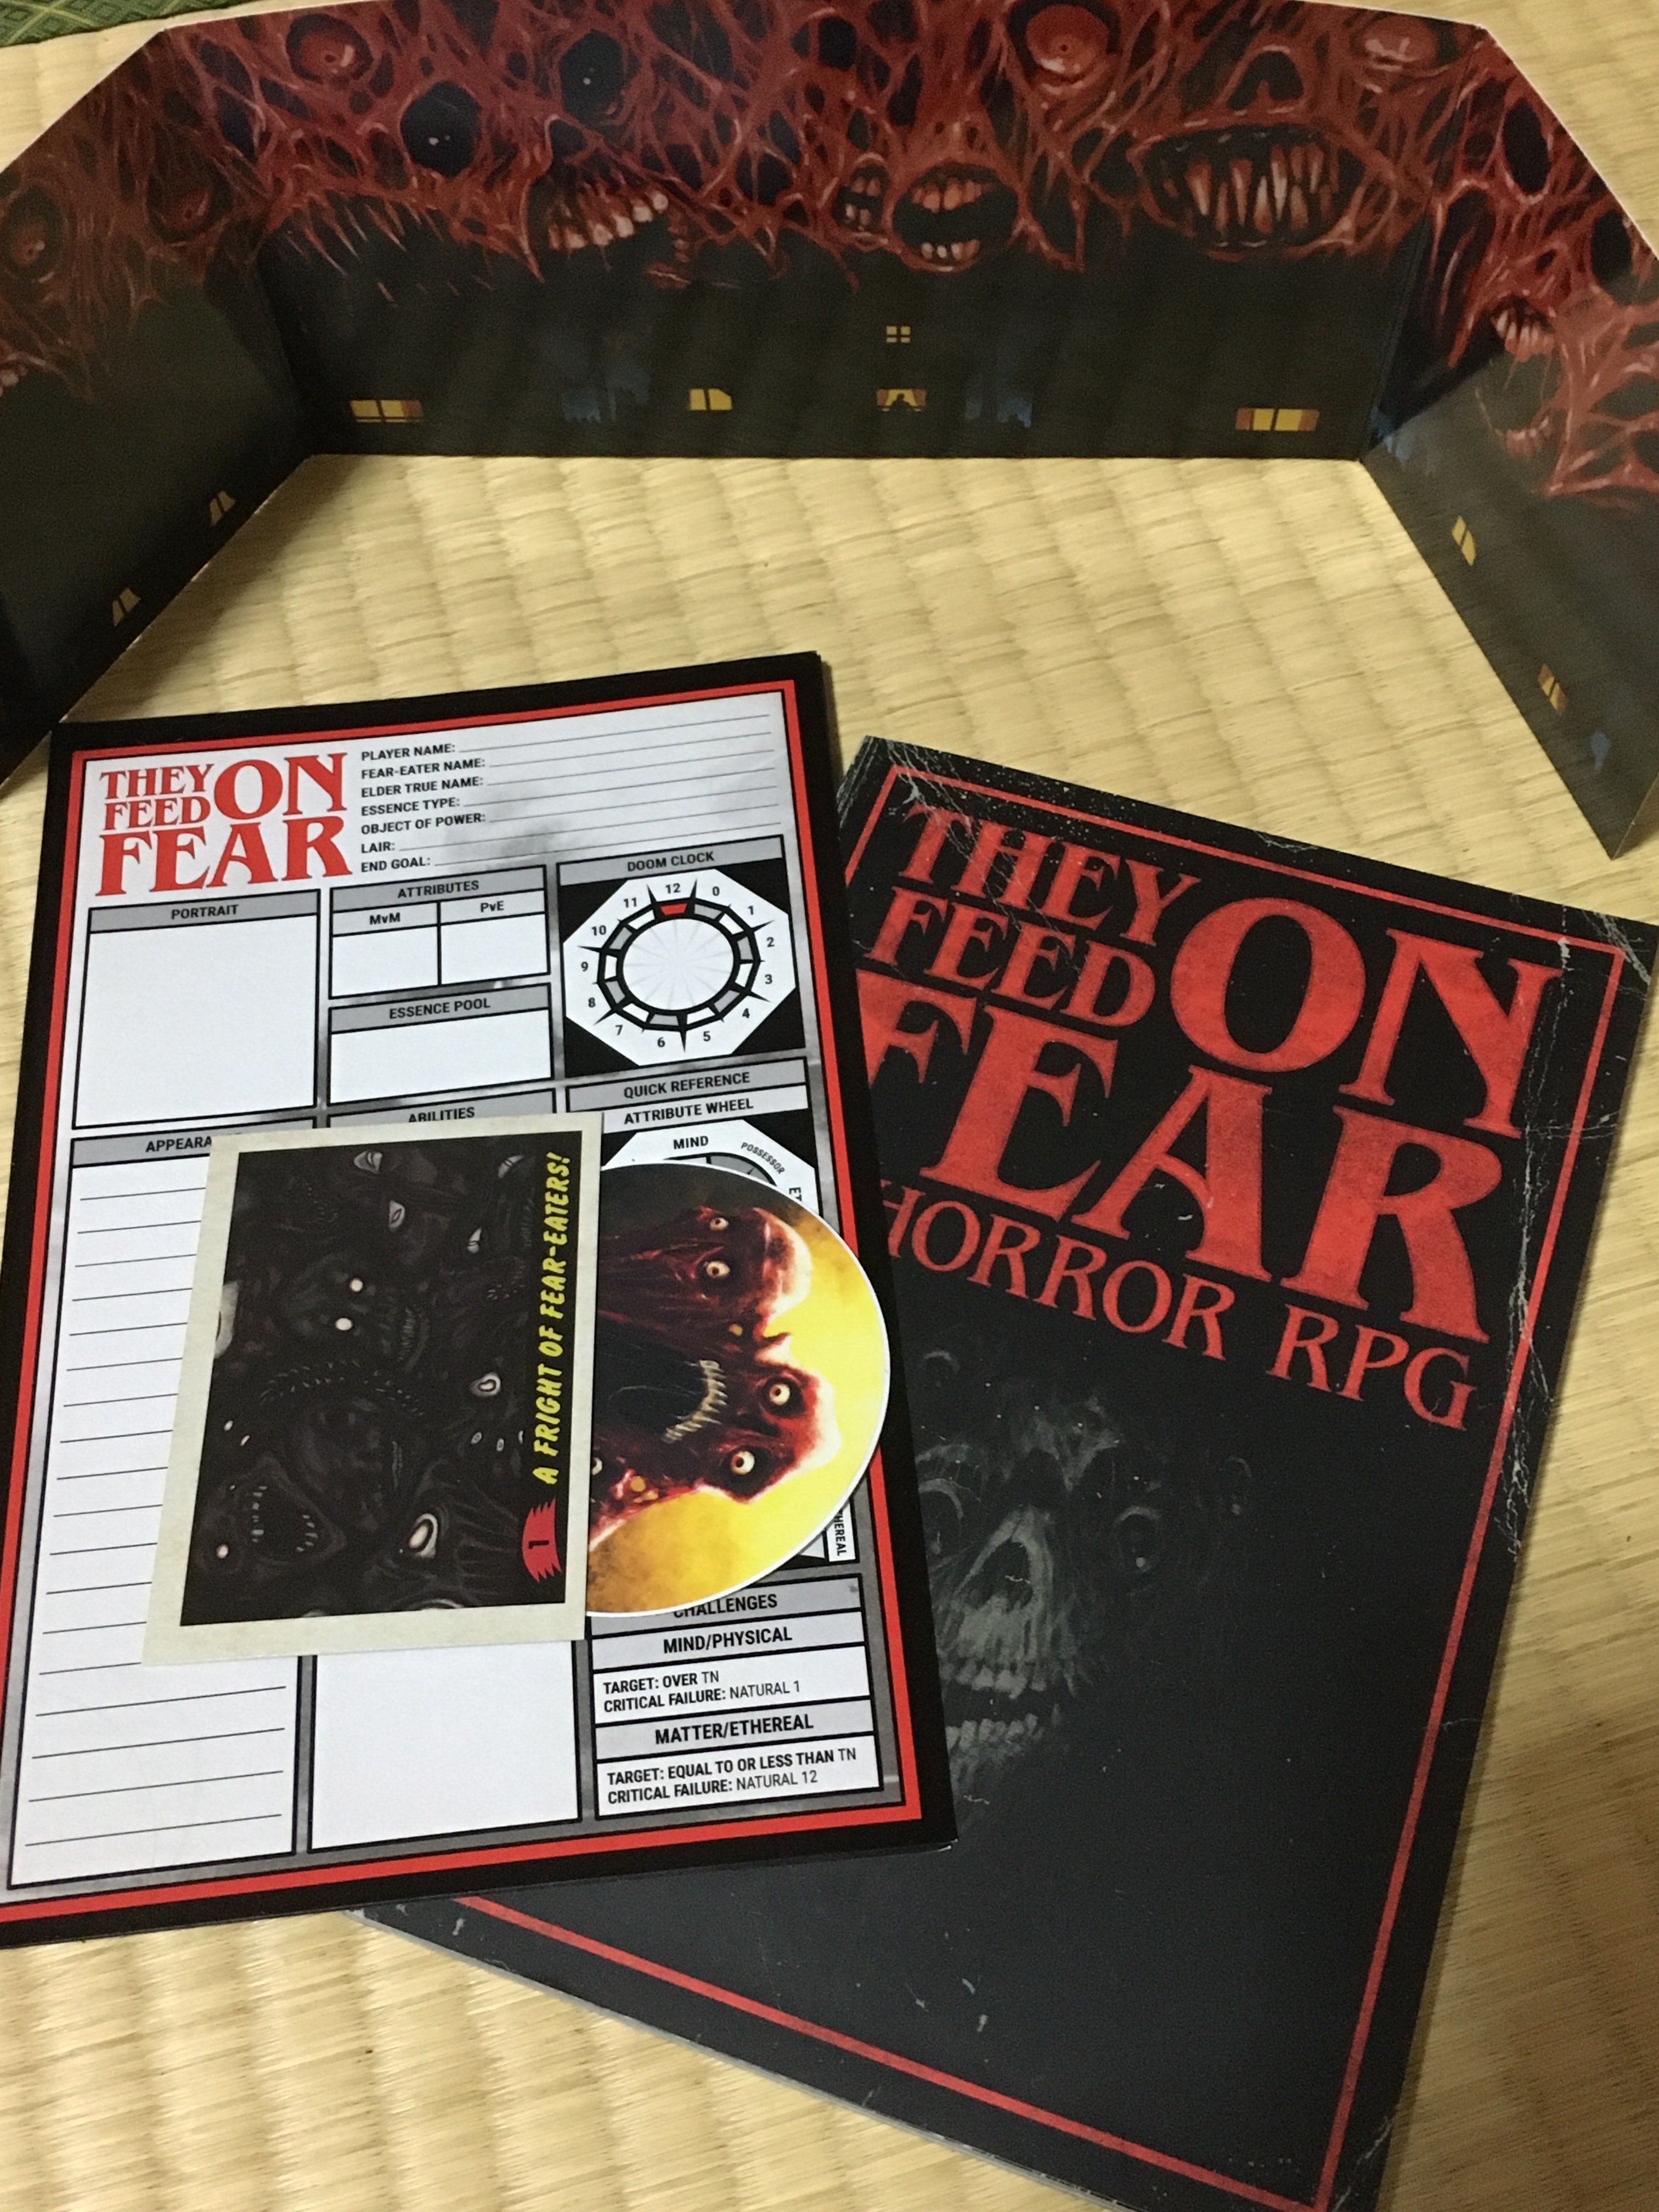 Join the DISCORD Server! - THEY FEED ON FEAR: A Horror RPG by ALEXEI VELLA